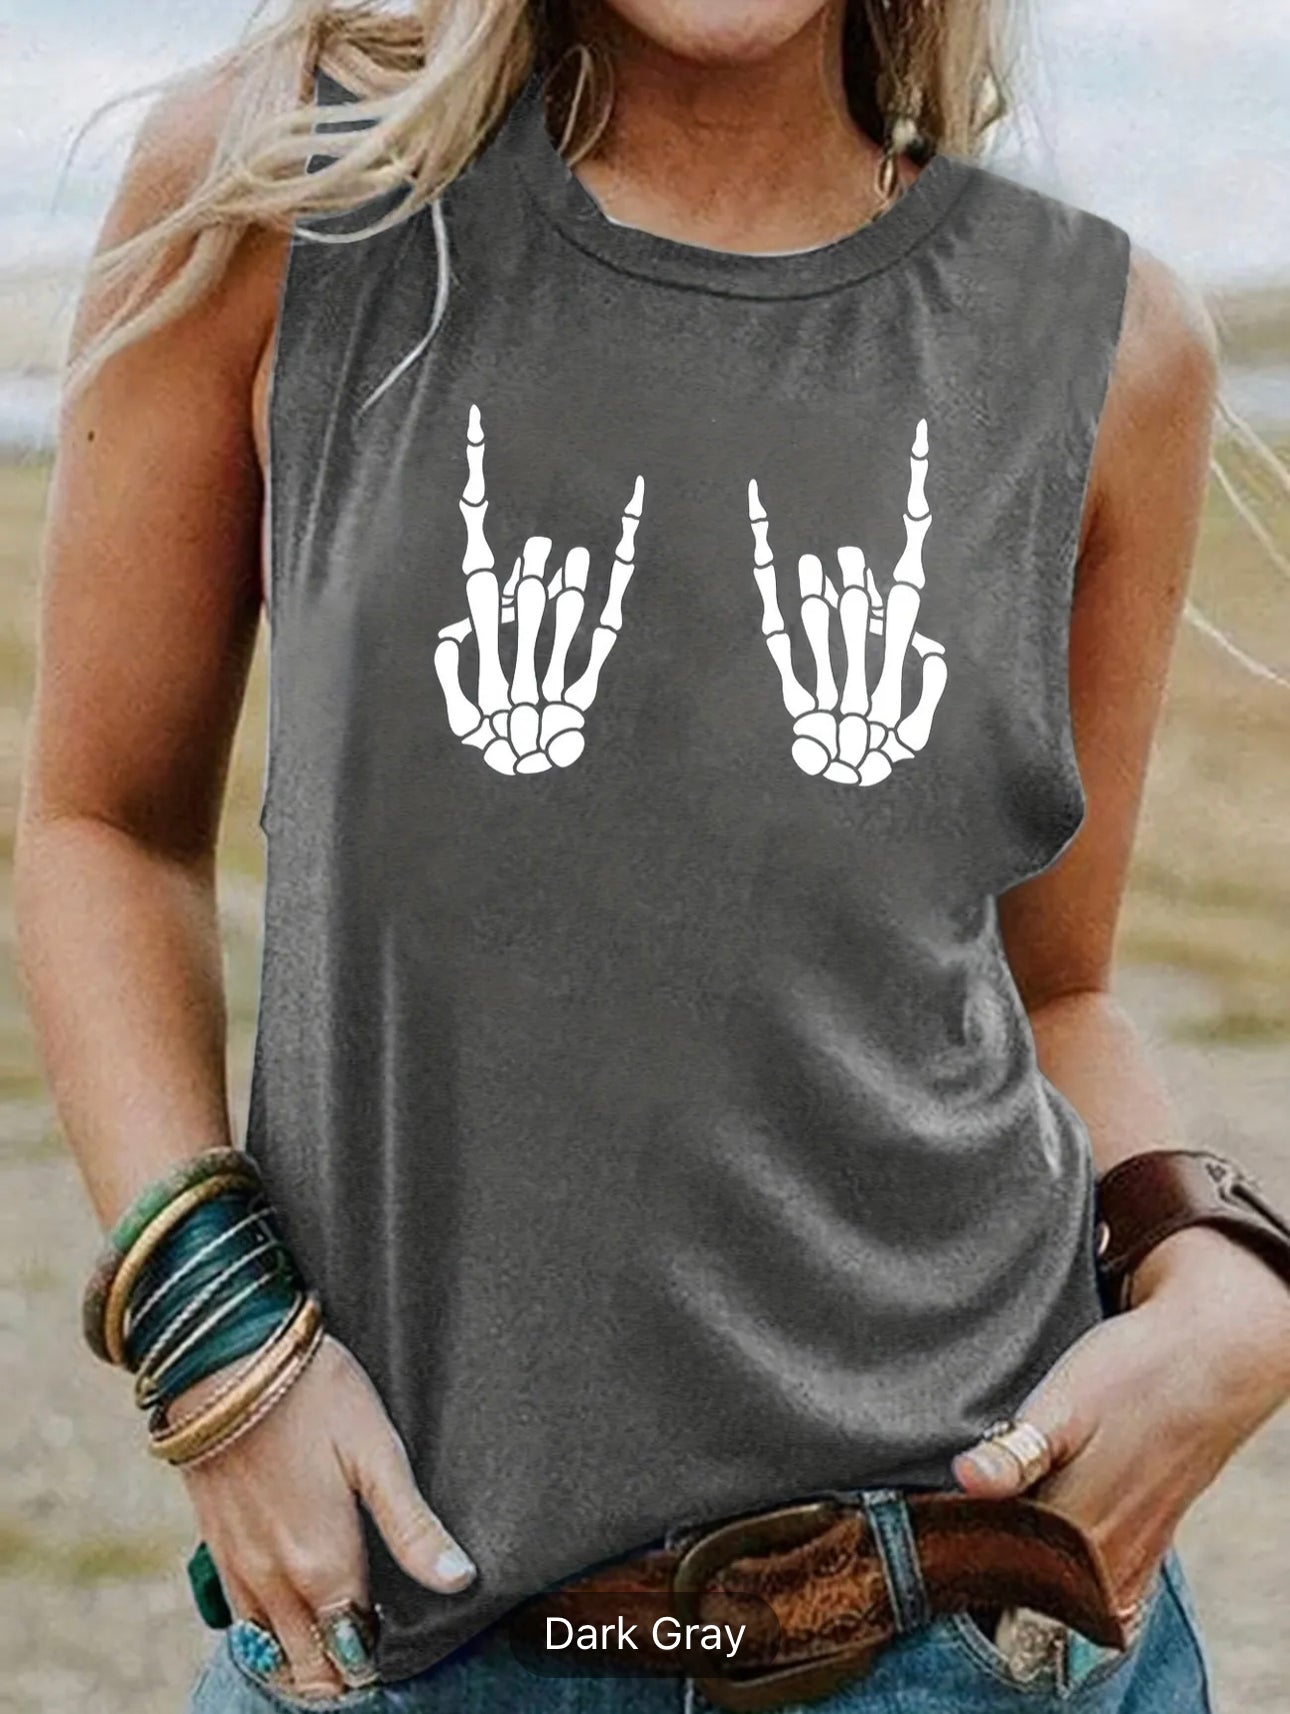 Women's Summer Tank Top: Skull Hand Print Crew Neck Sleeveless Top for Casual Style